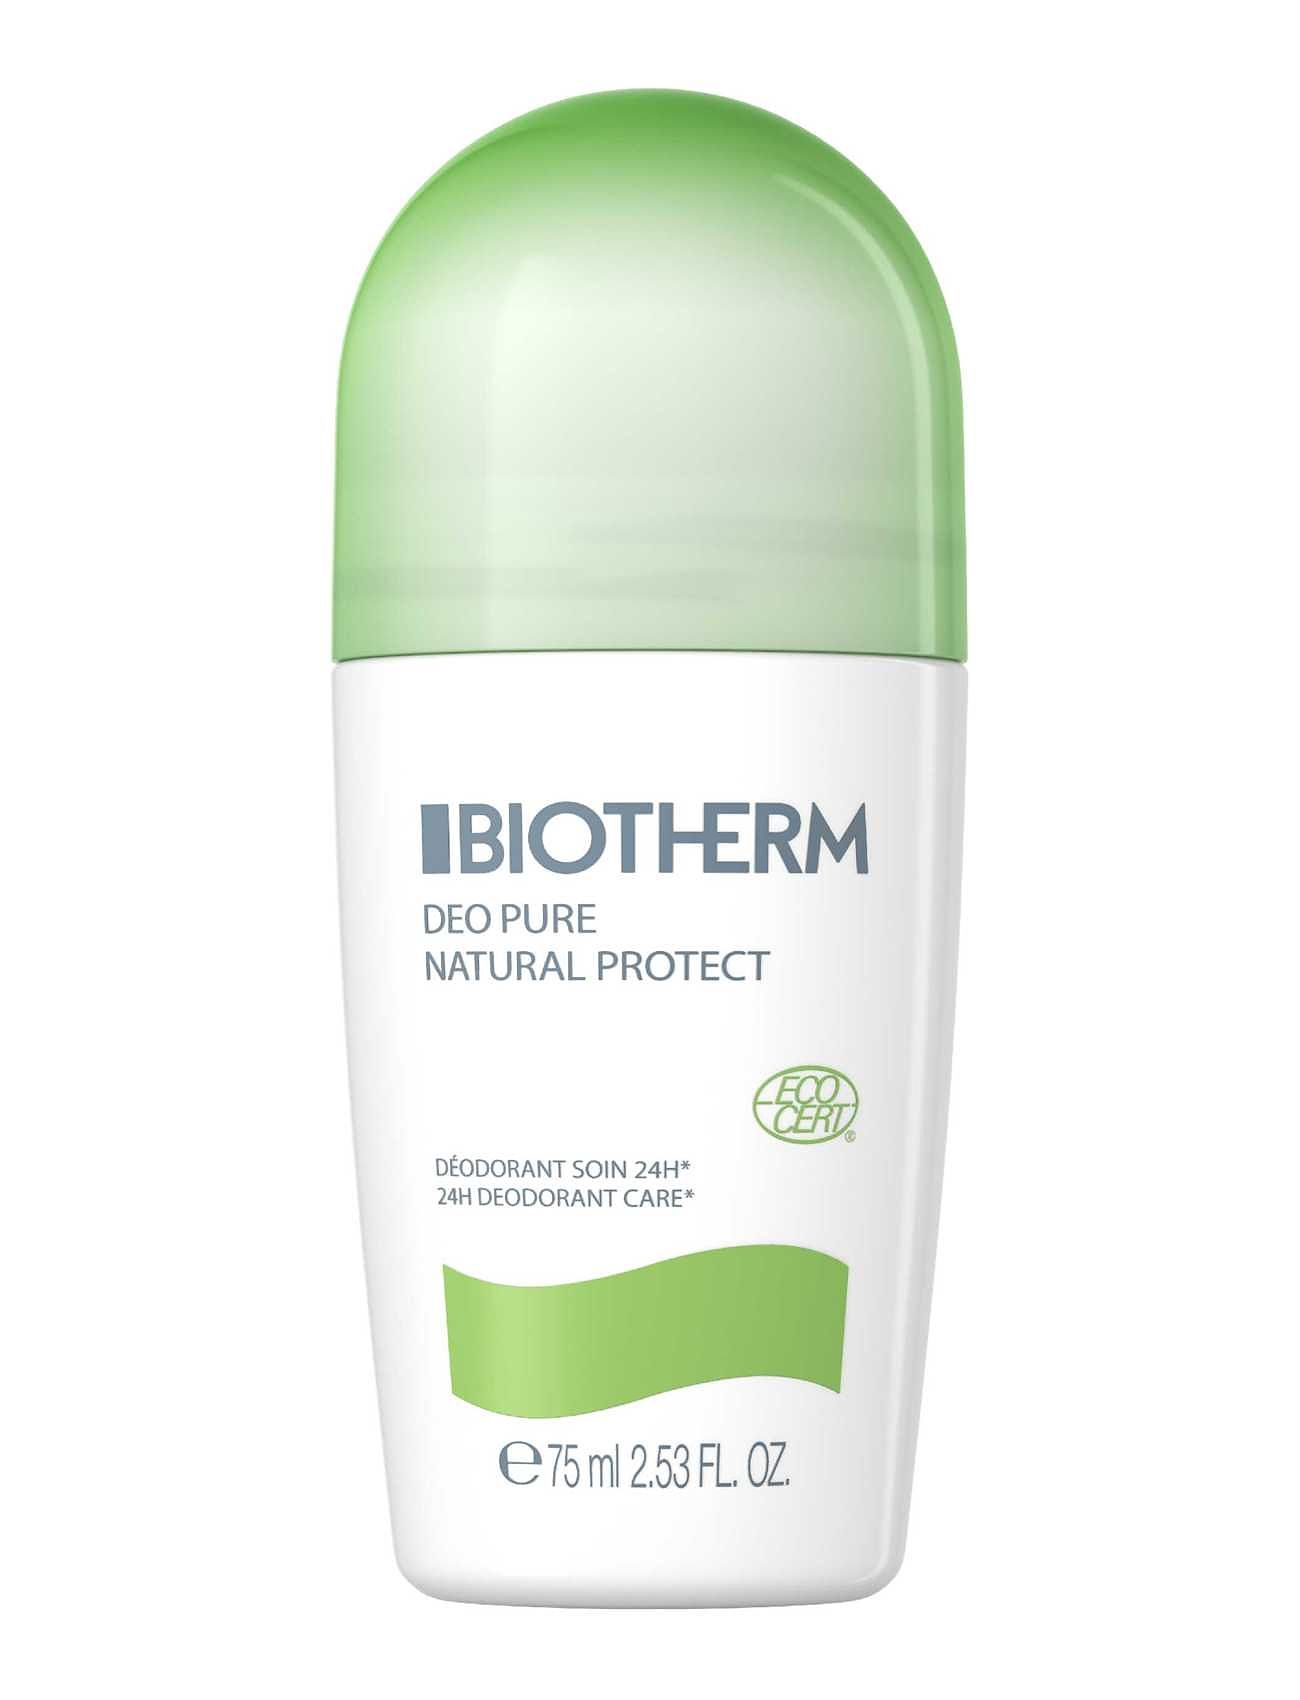 Biotherm "Deo Pure Ecocert Roll-On Deodorant Roll-on Nude Biotherm"